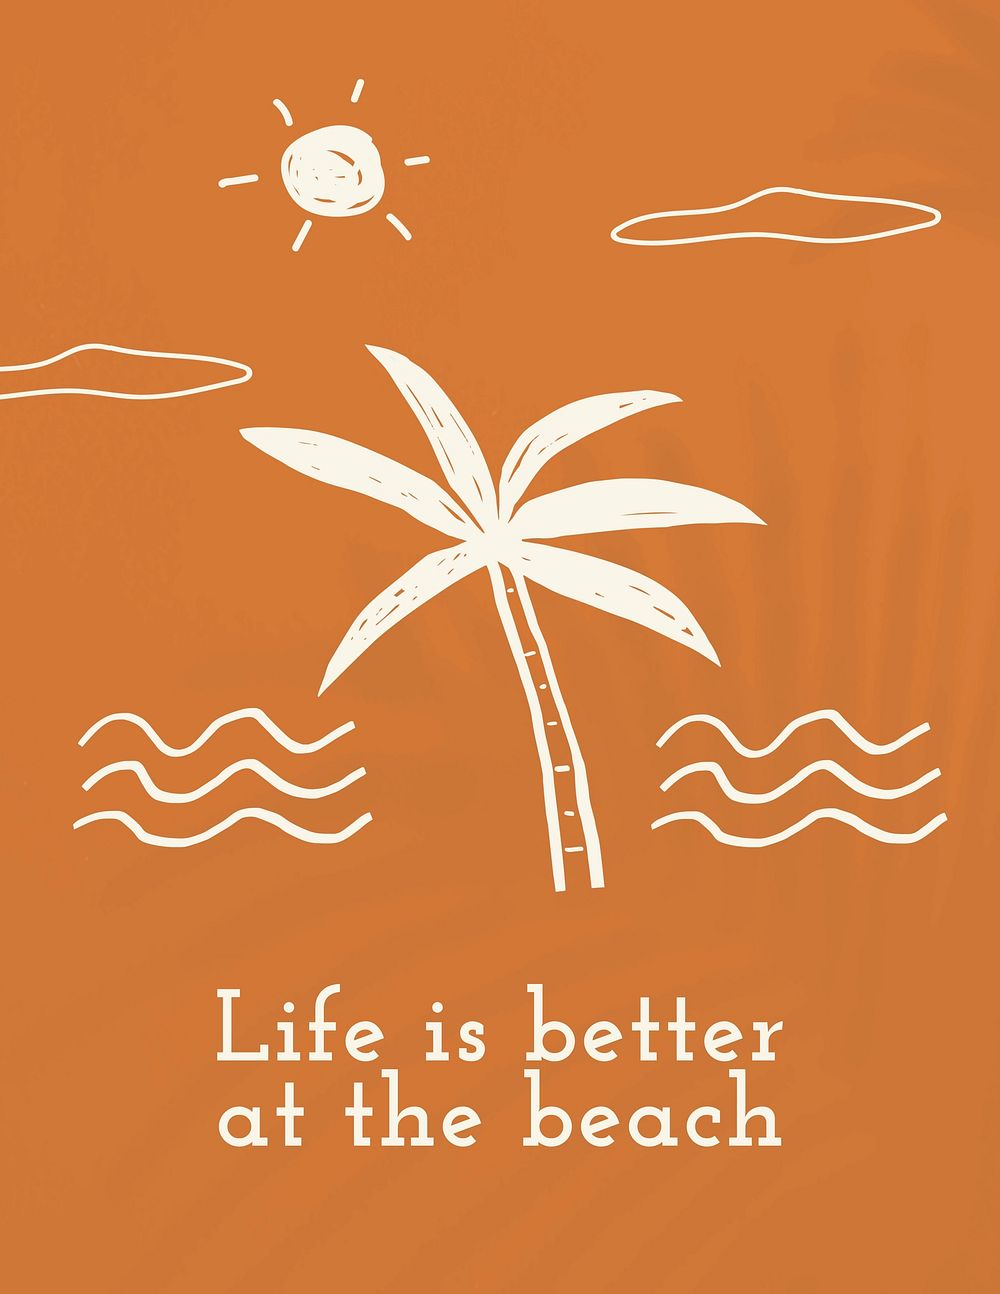 Beach doodle  poster template